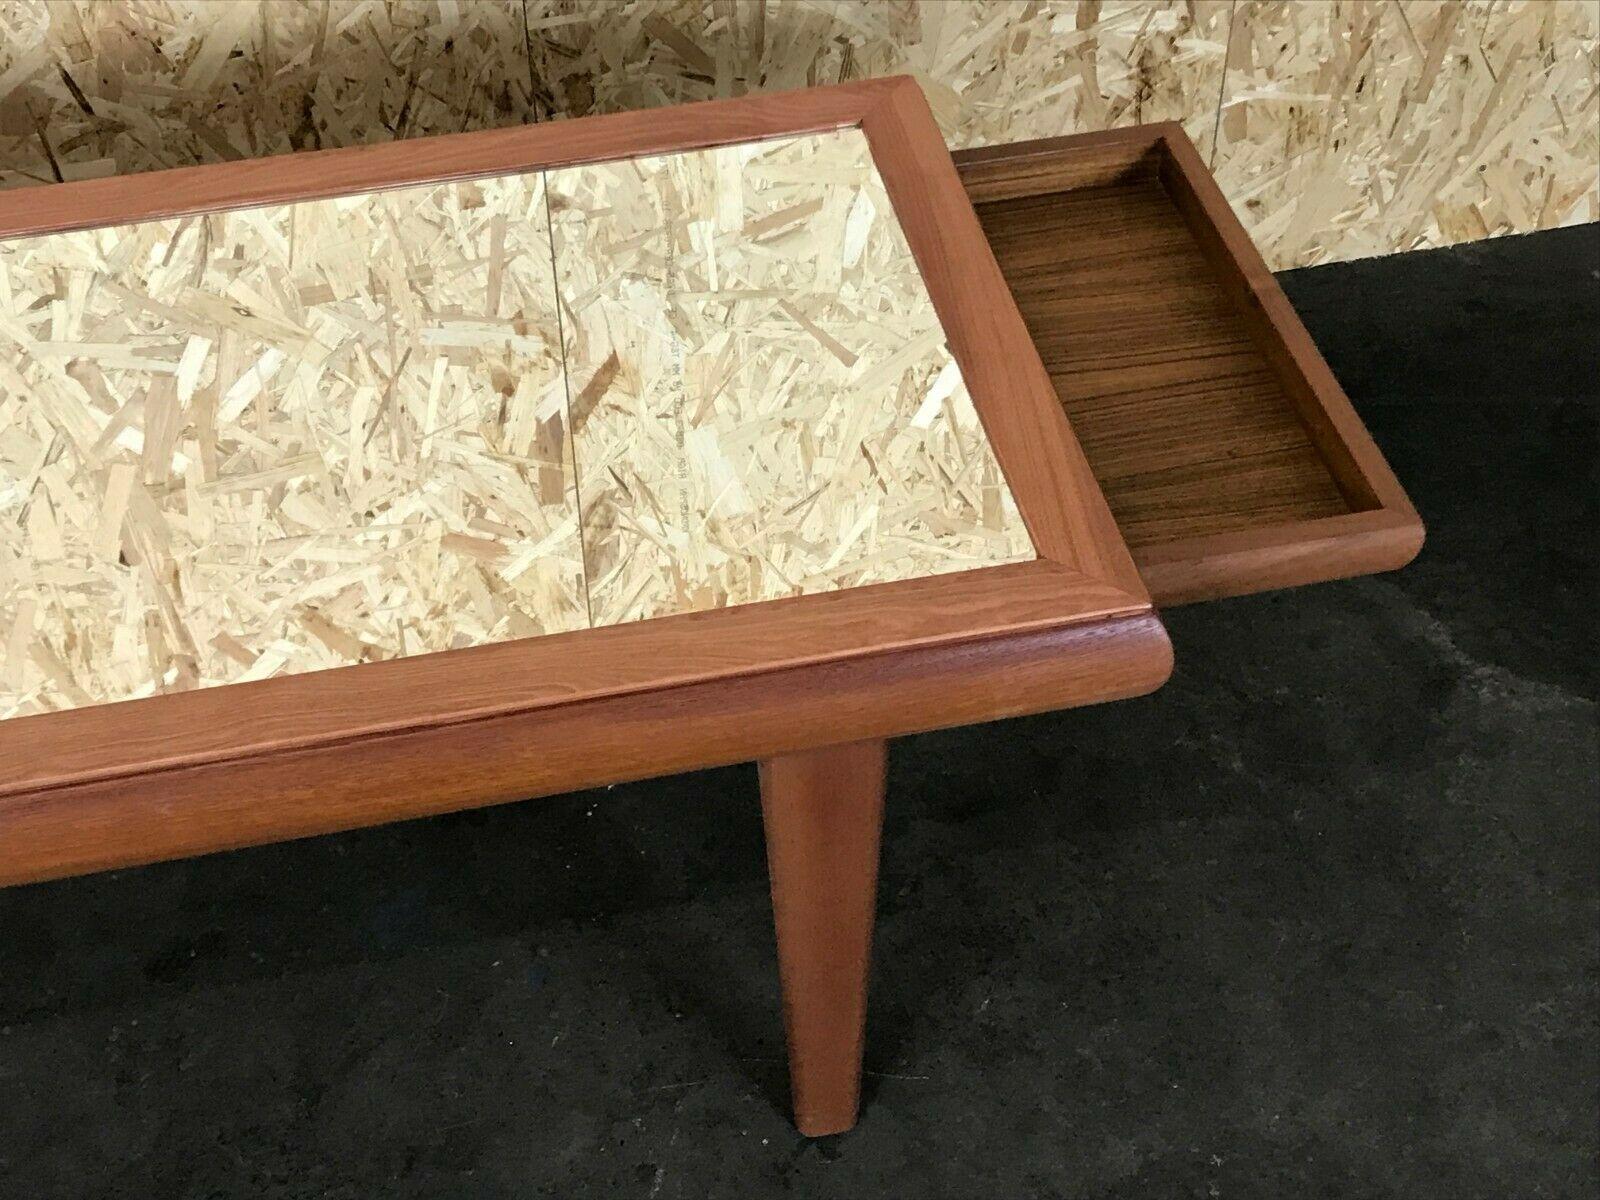 60s 70s Teak Table Coffee Table Danish Design with Mirror For Sale 4